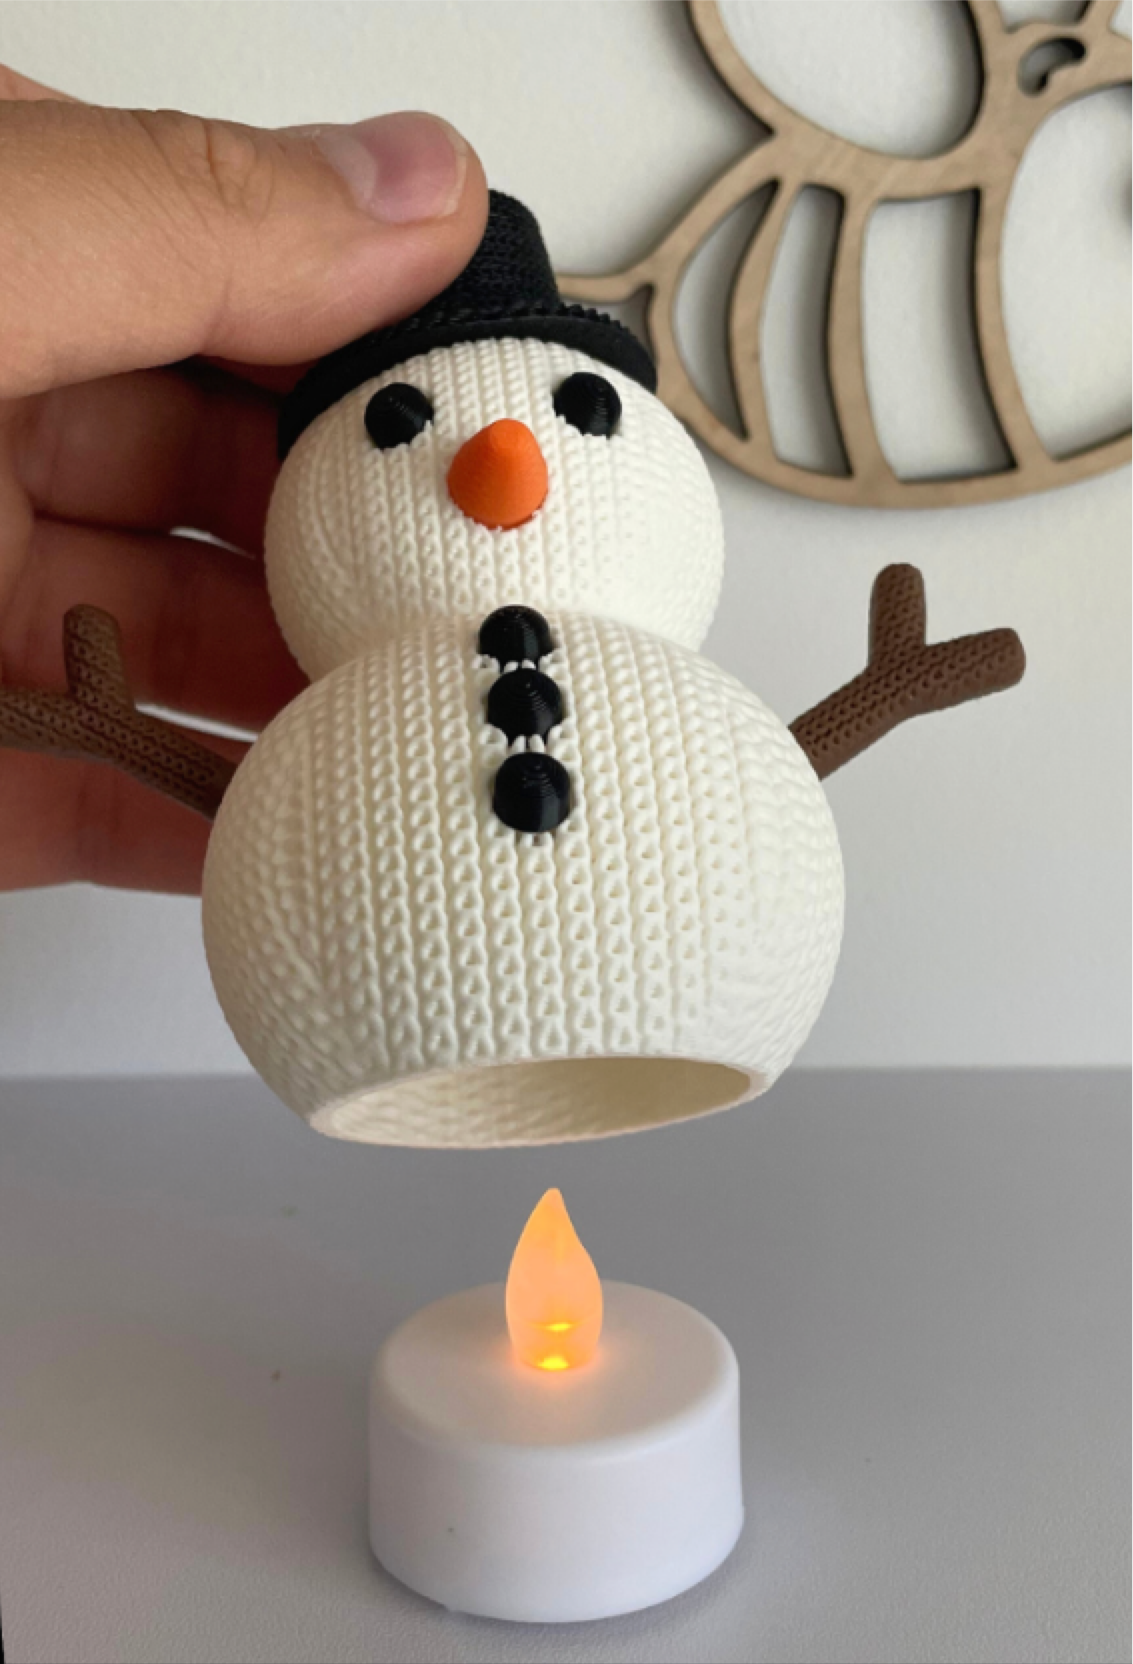 3D Printed Knitted Snowman Candle Figurine - Festive Christmas Ornament - GoodBuy.ai